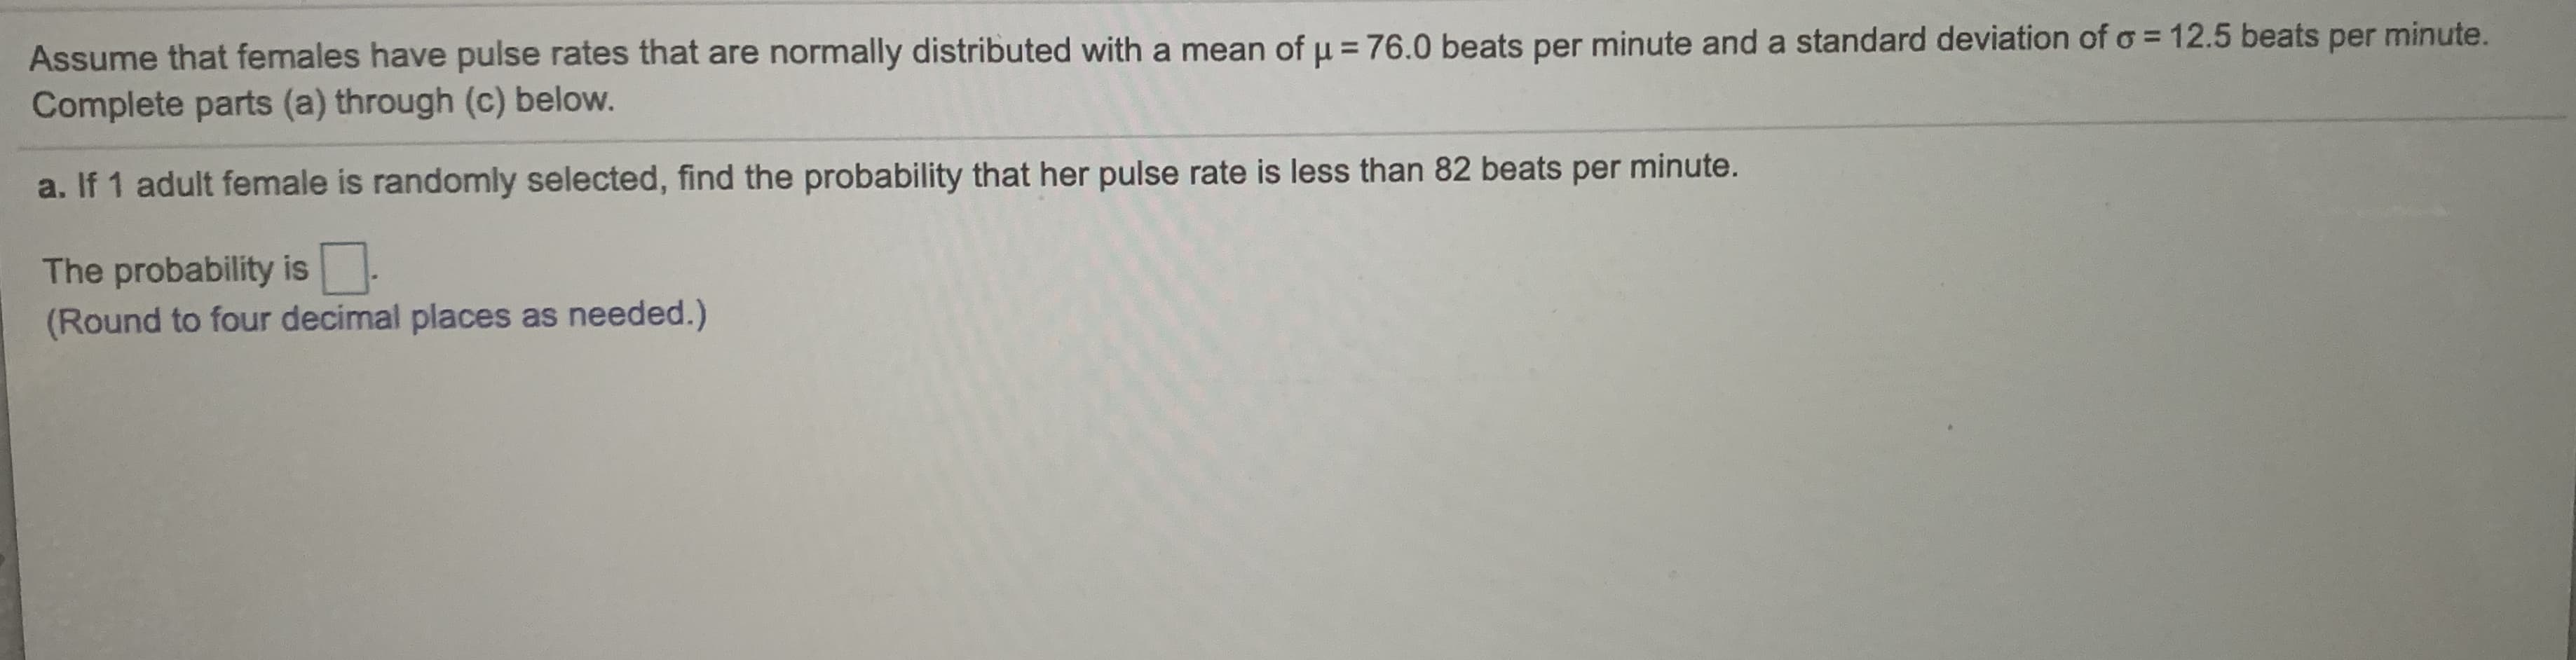 Assume that females have pulse rates that are normally distributed with a mean of u = 76.0 beats per minute and a standard deviation of o = 12.5 beats per minute.
Complete parts (a) through (c) below.
a. If 1 adult female is randomly selected, find the probability that her pulse rate is less than 82 beats per minute.
The probability is.
(Round to four decimal places as needed.)
